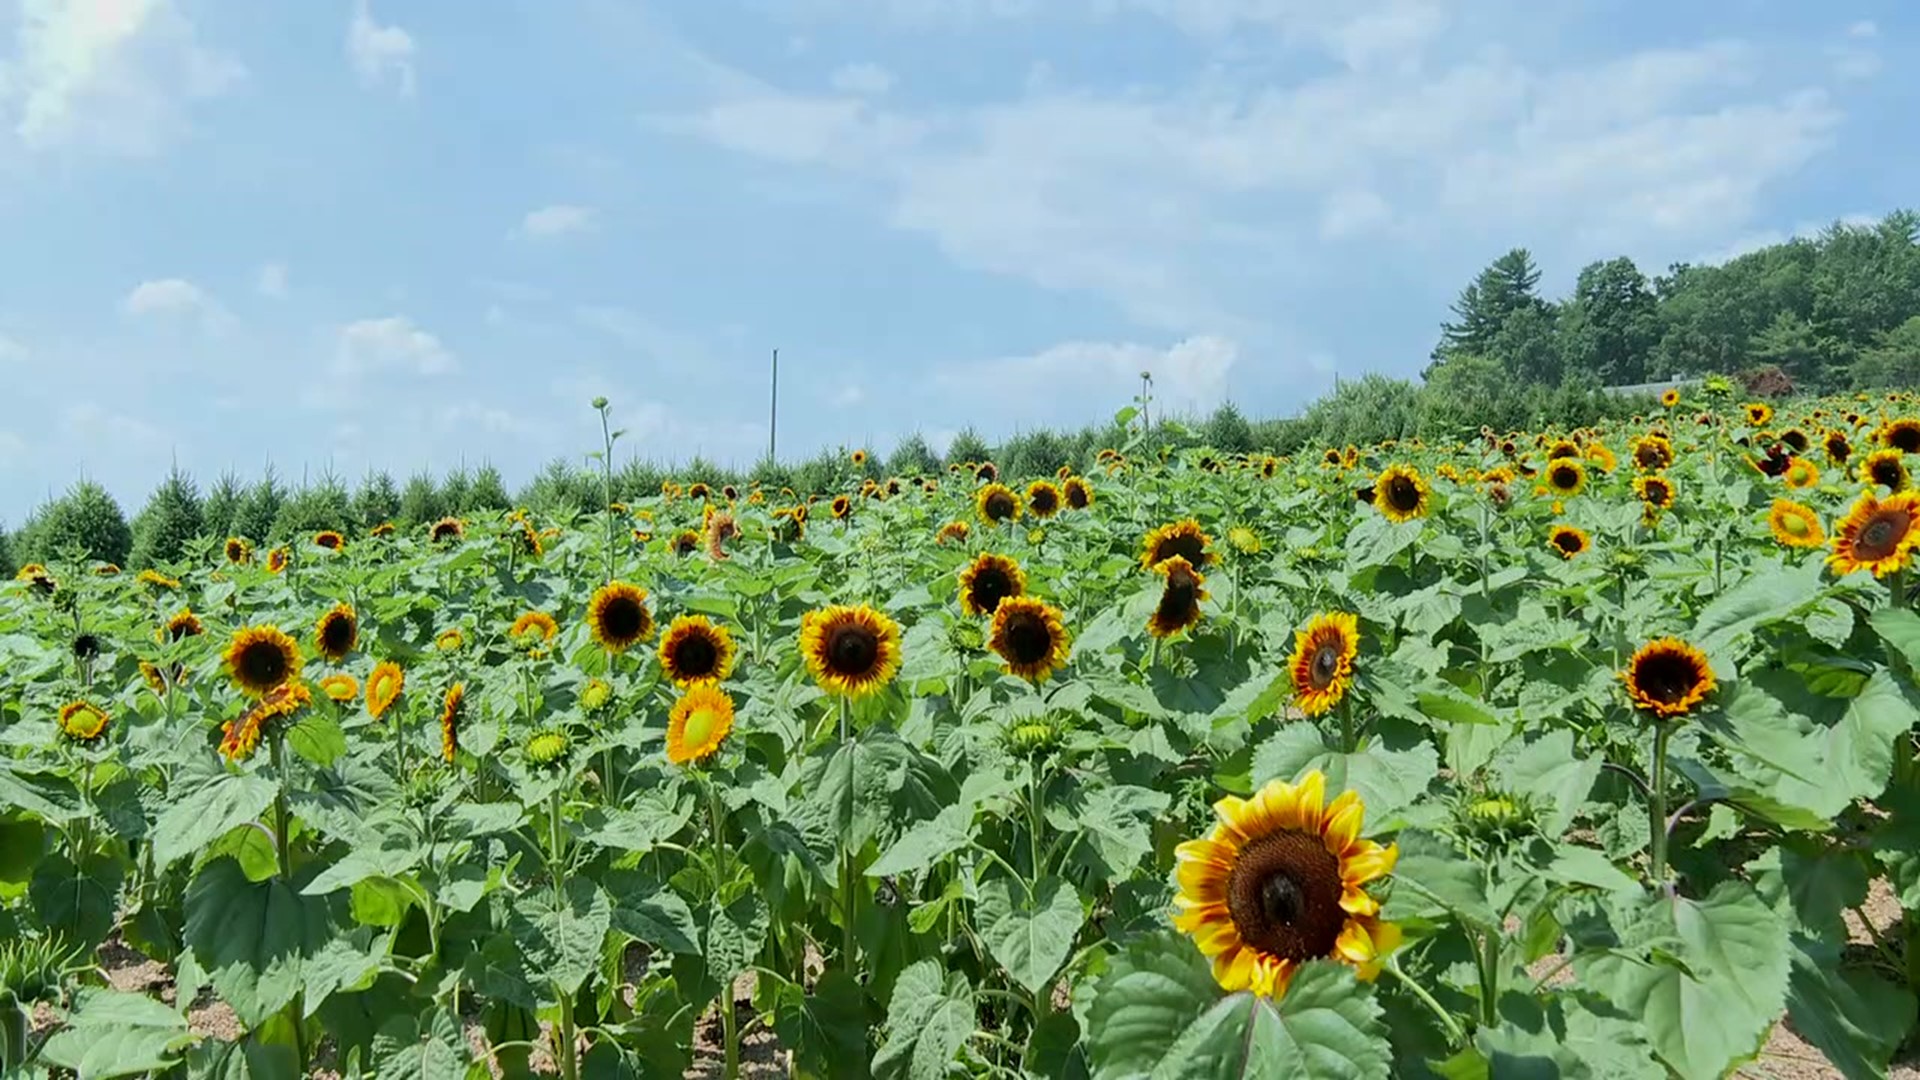 The Sunflower Festival takes place the next two weekends in Carbon County.